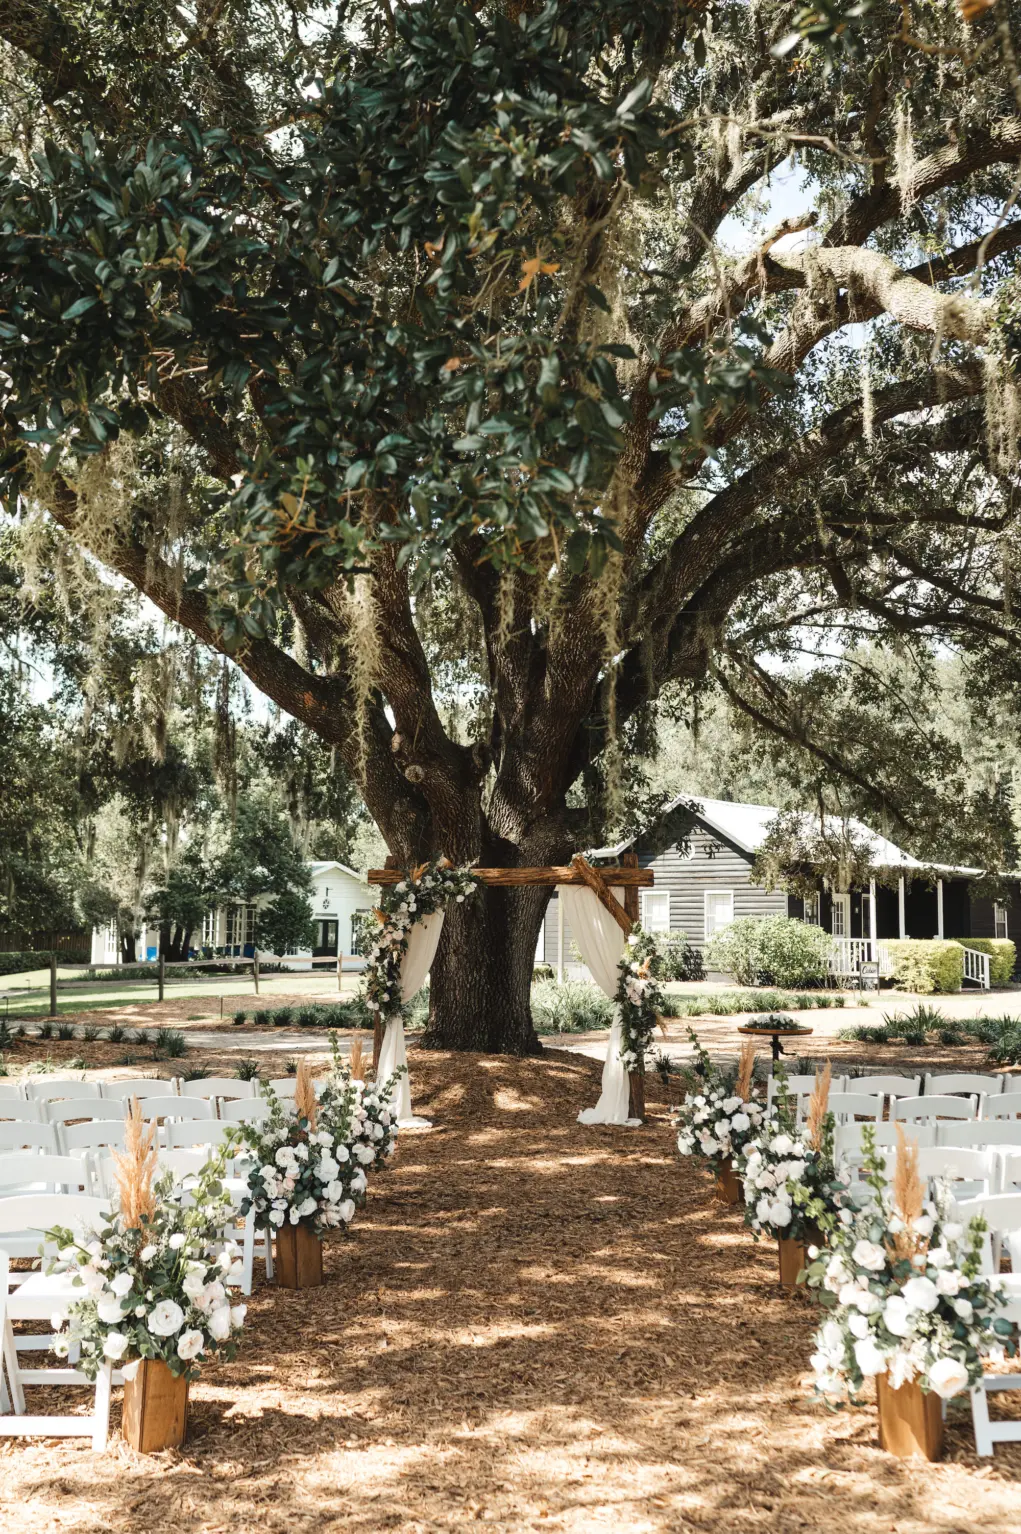 Oak Tree Wedding Ceremony Inspiration | White and Blush Roses with Pampas Grass Aisle Floral Arrangement Ideas | Tampa Bay Florist Monarch Events and Design | Venue Cross Creek Ranch